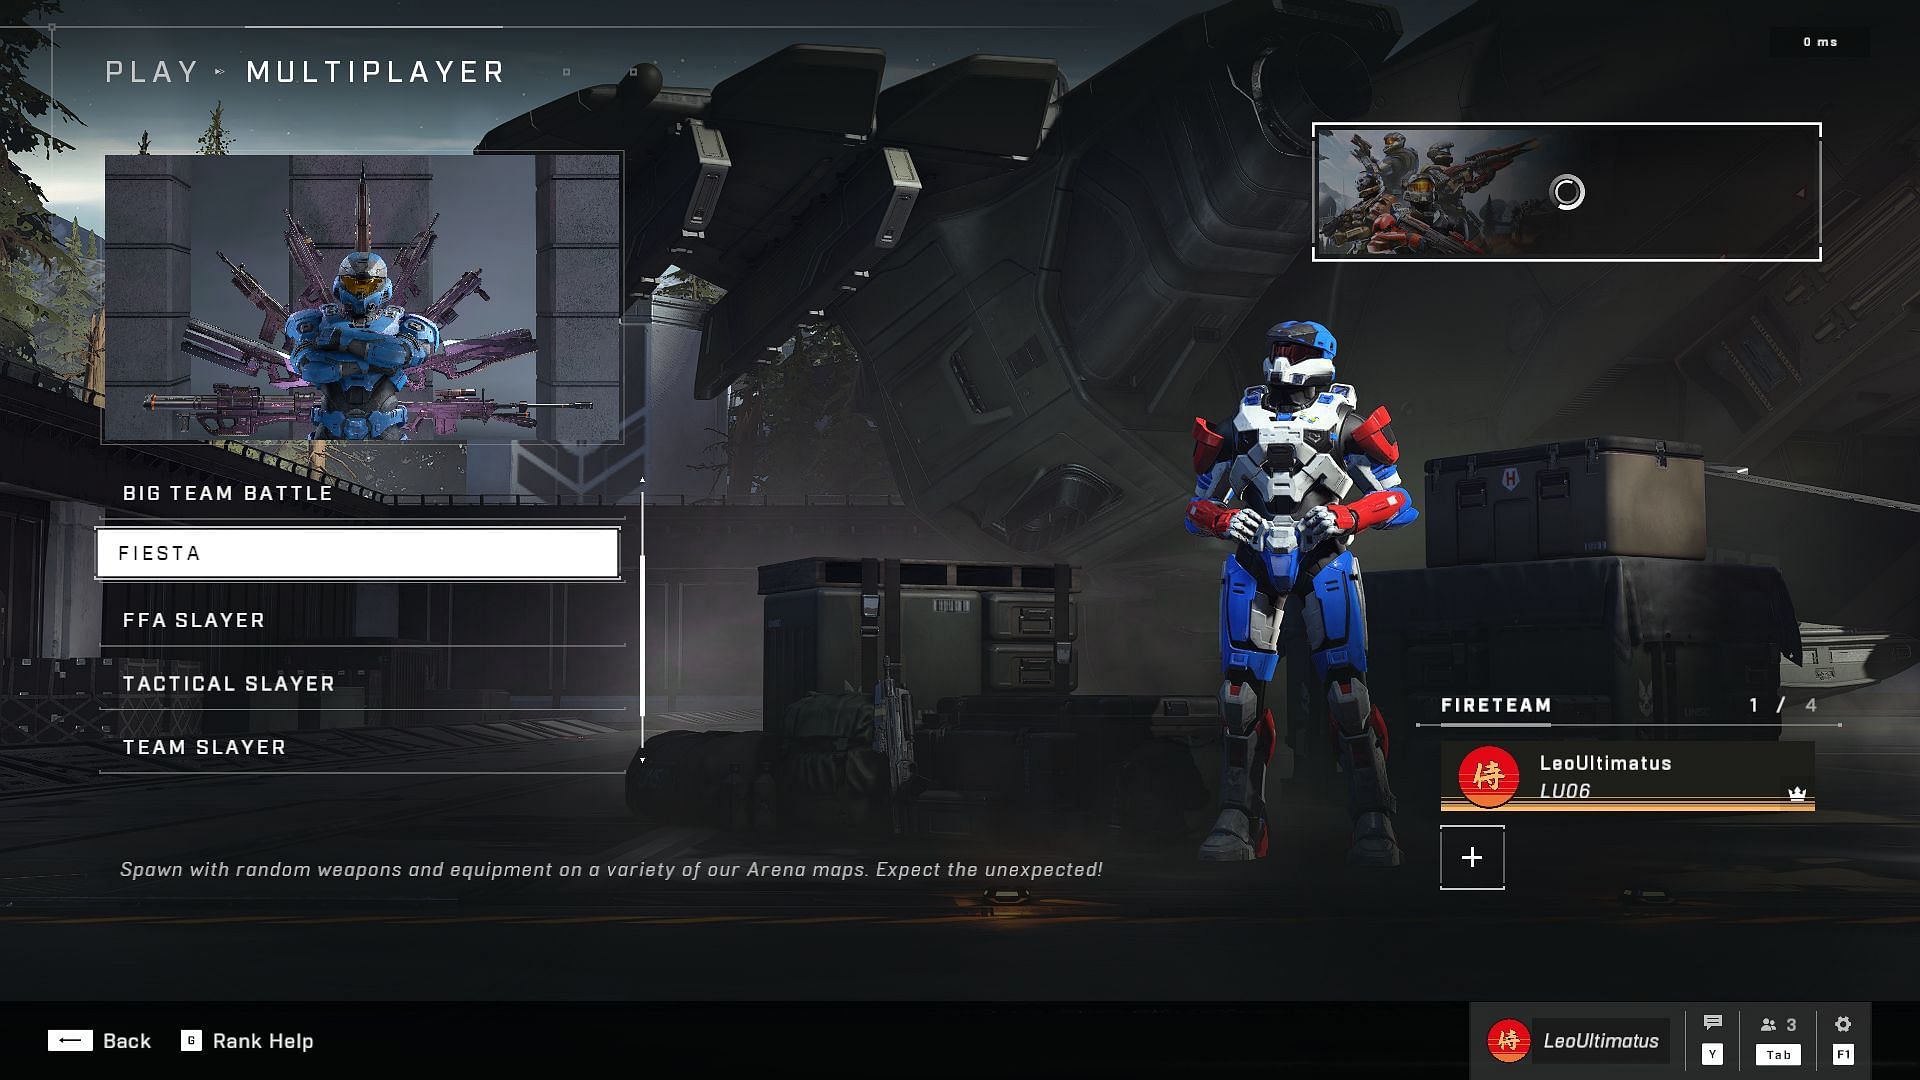 Players can choose the different playlists (image via Halo Infinite)